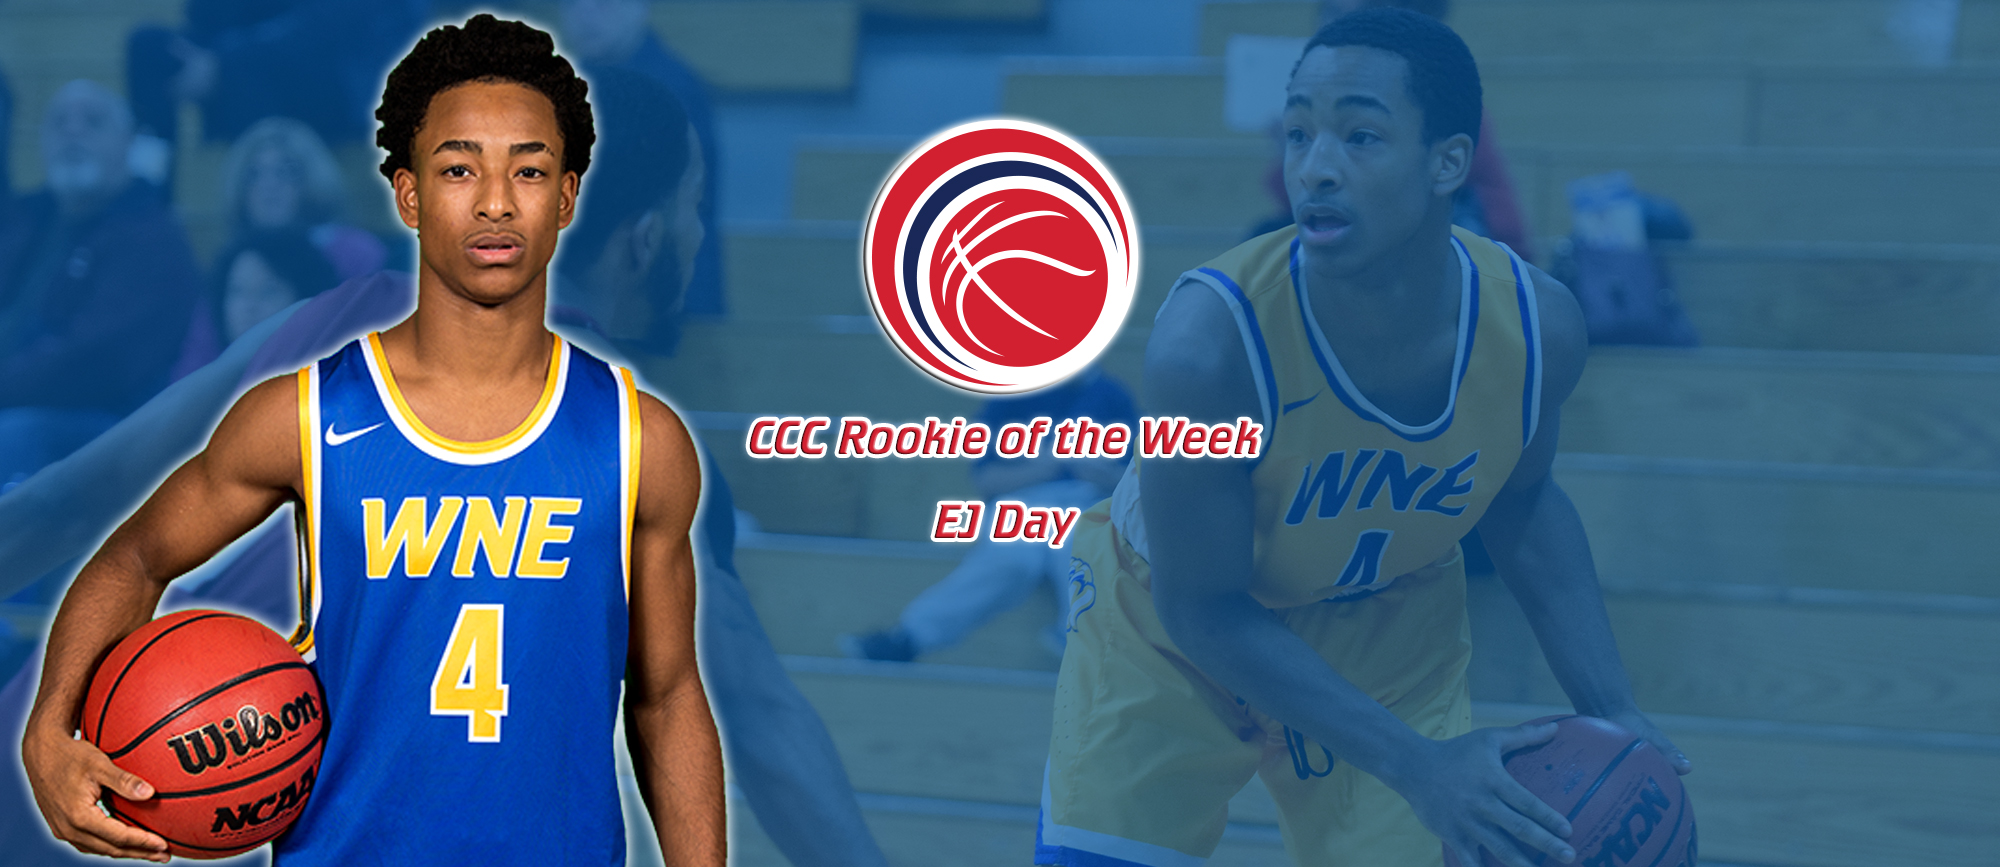 EJ Day Named CCC Rookie of the Week